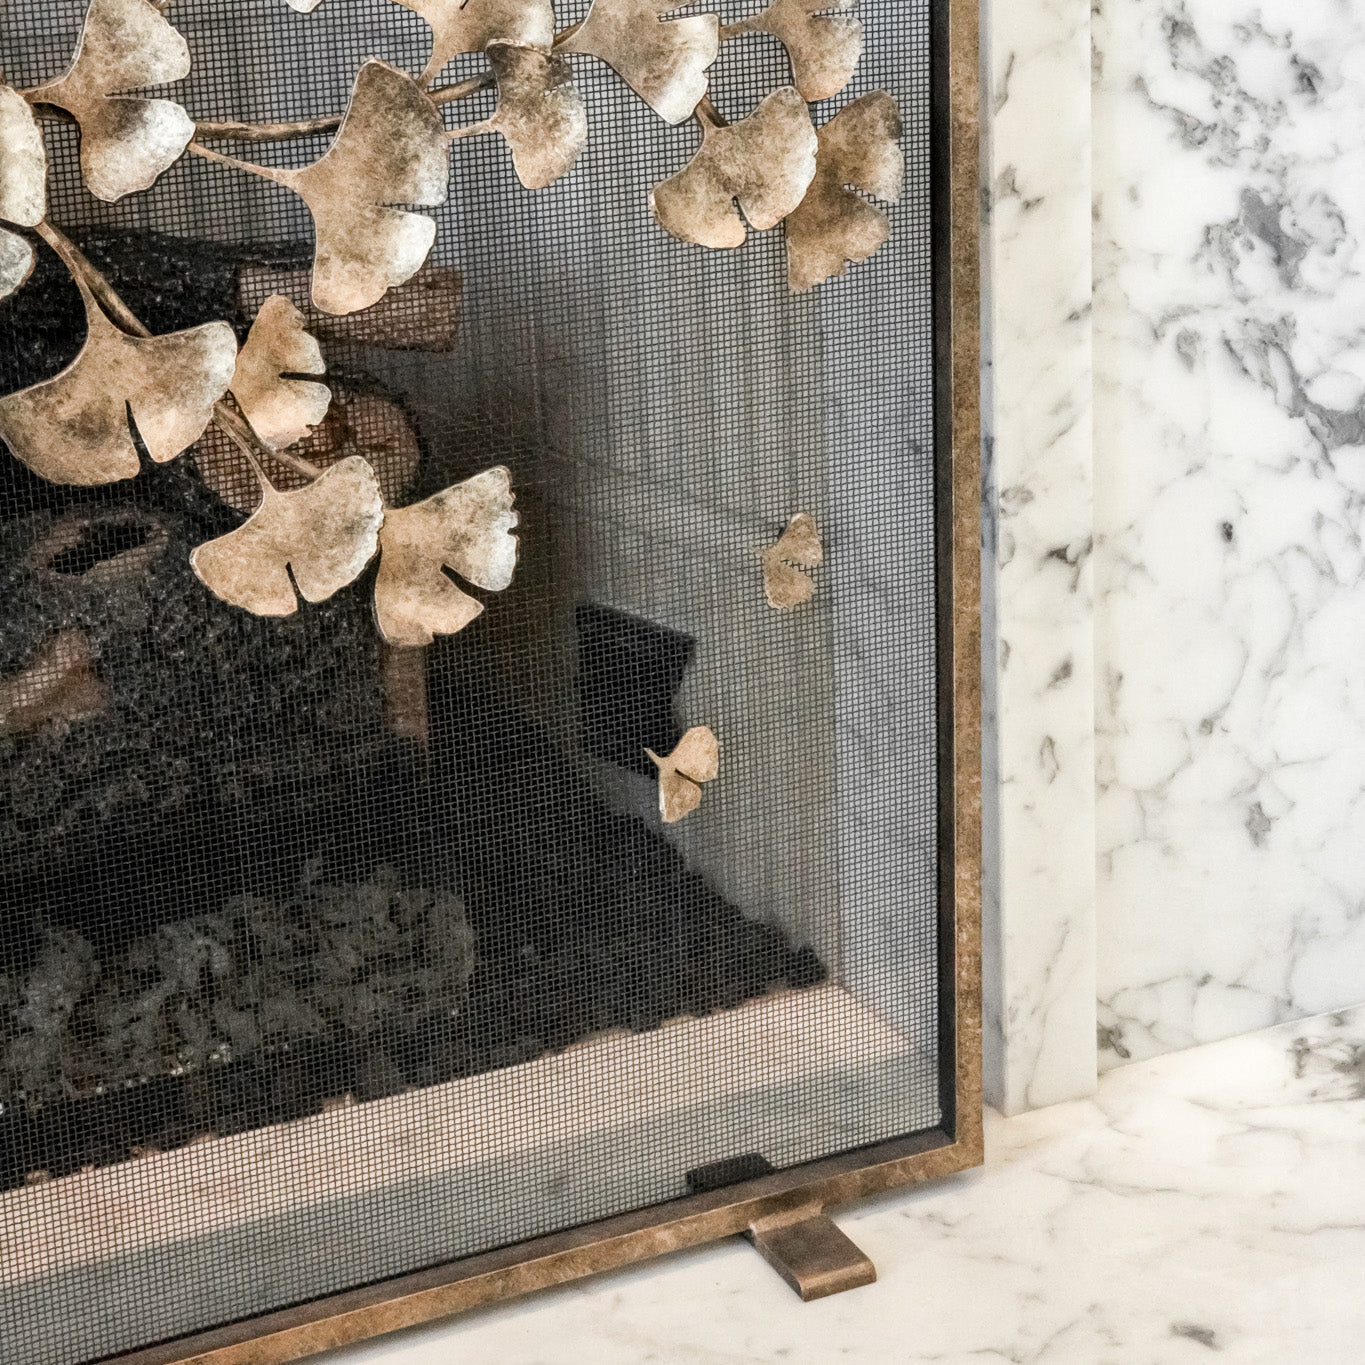 Ginkgo Fireplace Screen in Aged Gold